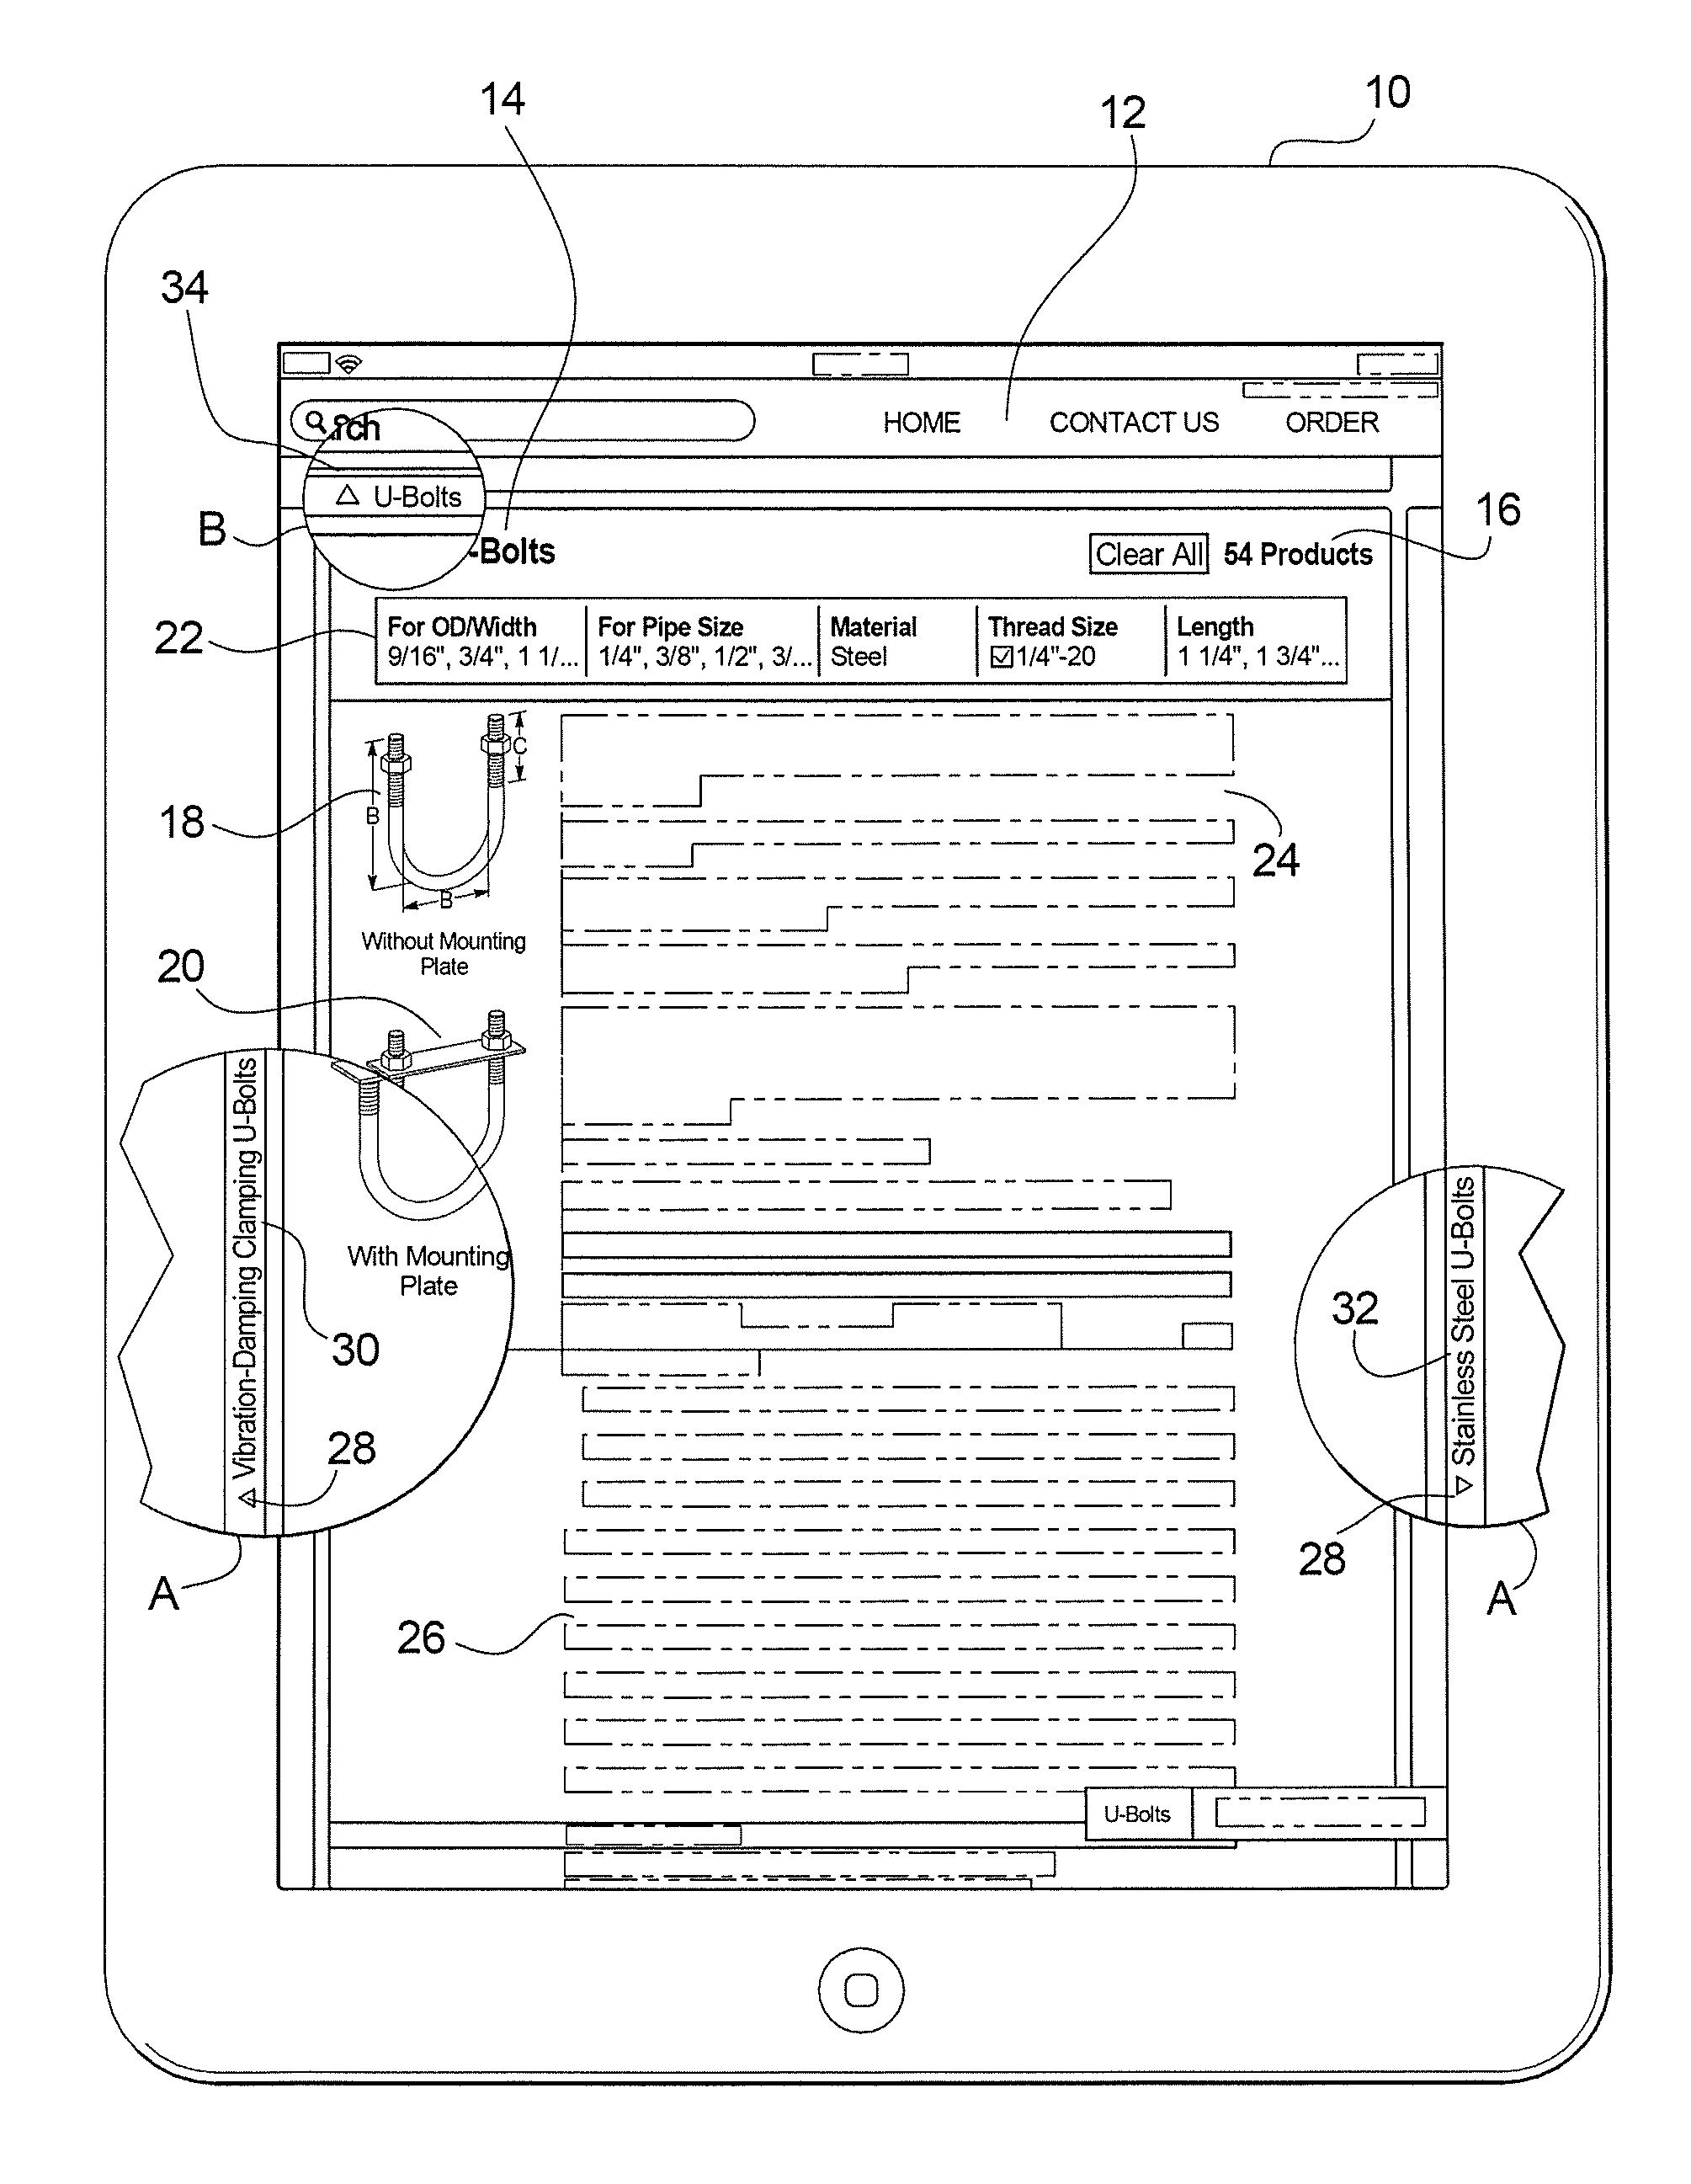 System and method for browsing a product catalog and for dynamically generated product paths